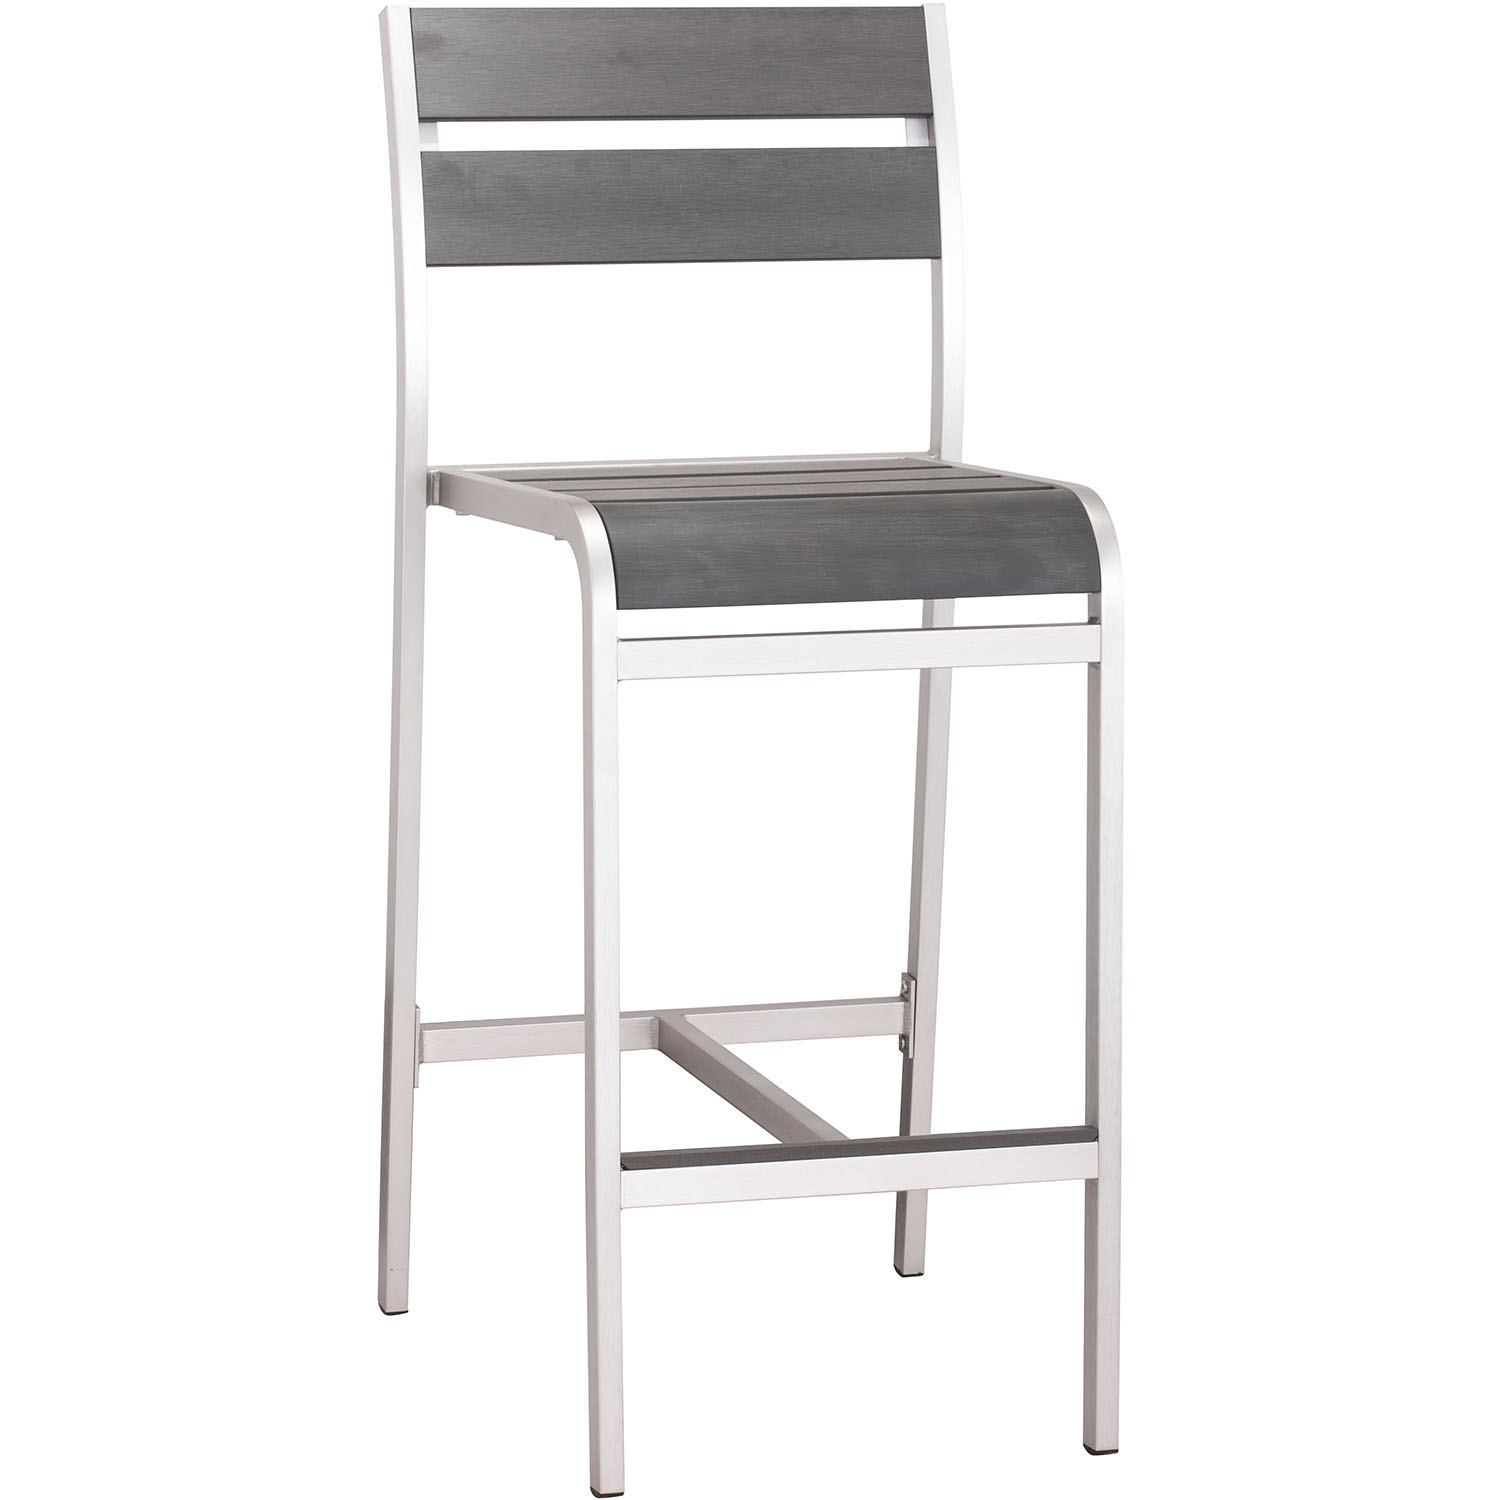 Outdoor Megapolis Bar Armless Chairs (set Of 2): Brushed Aluminum